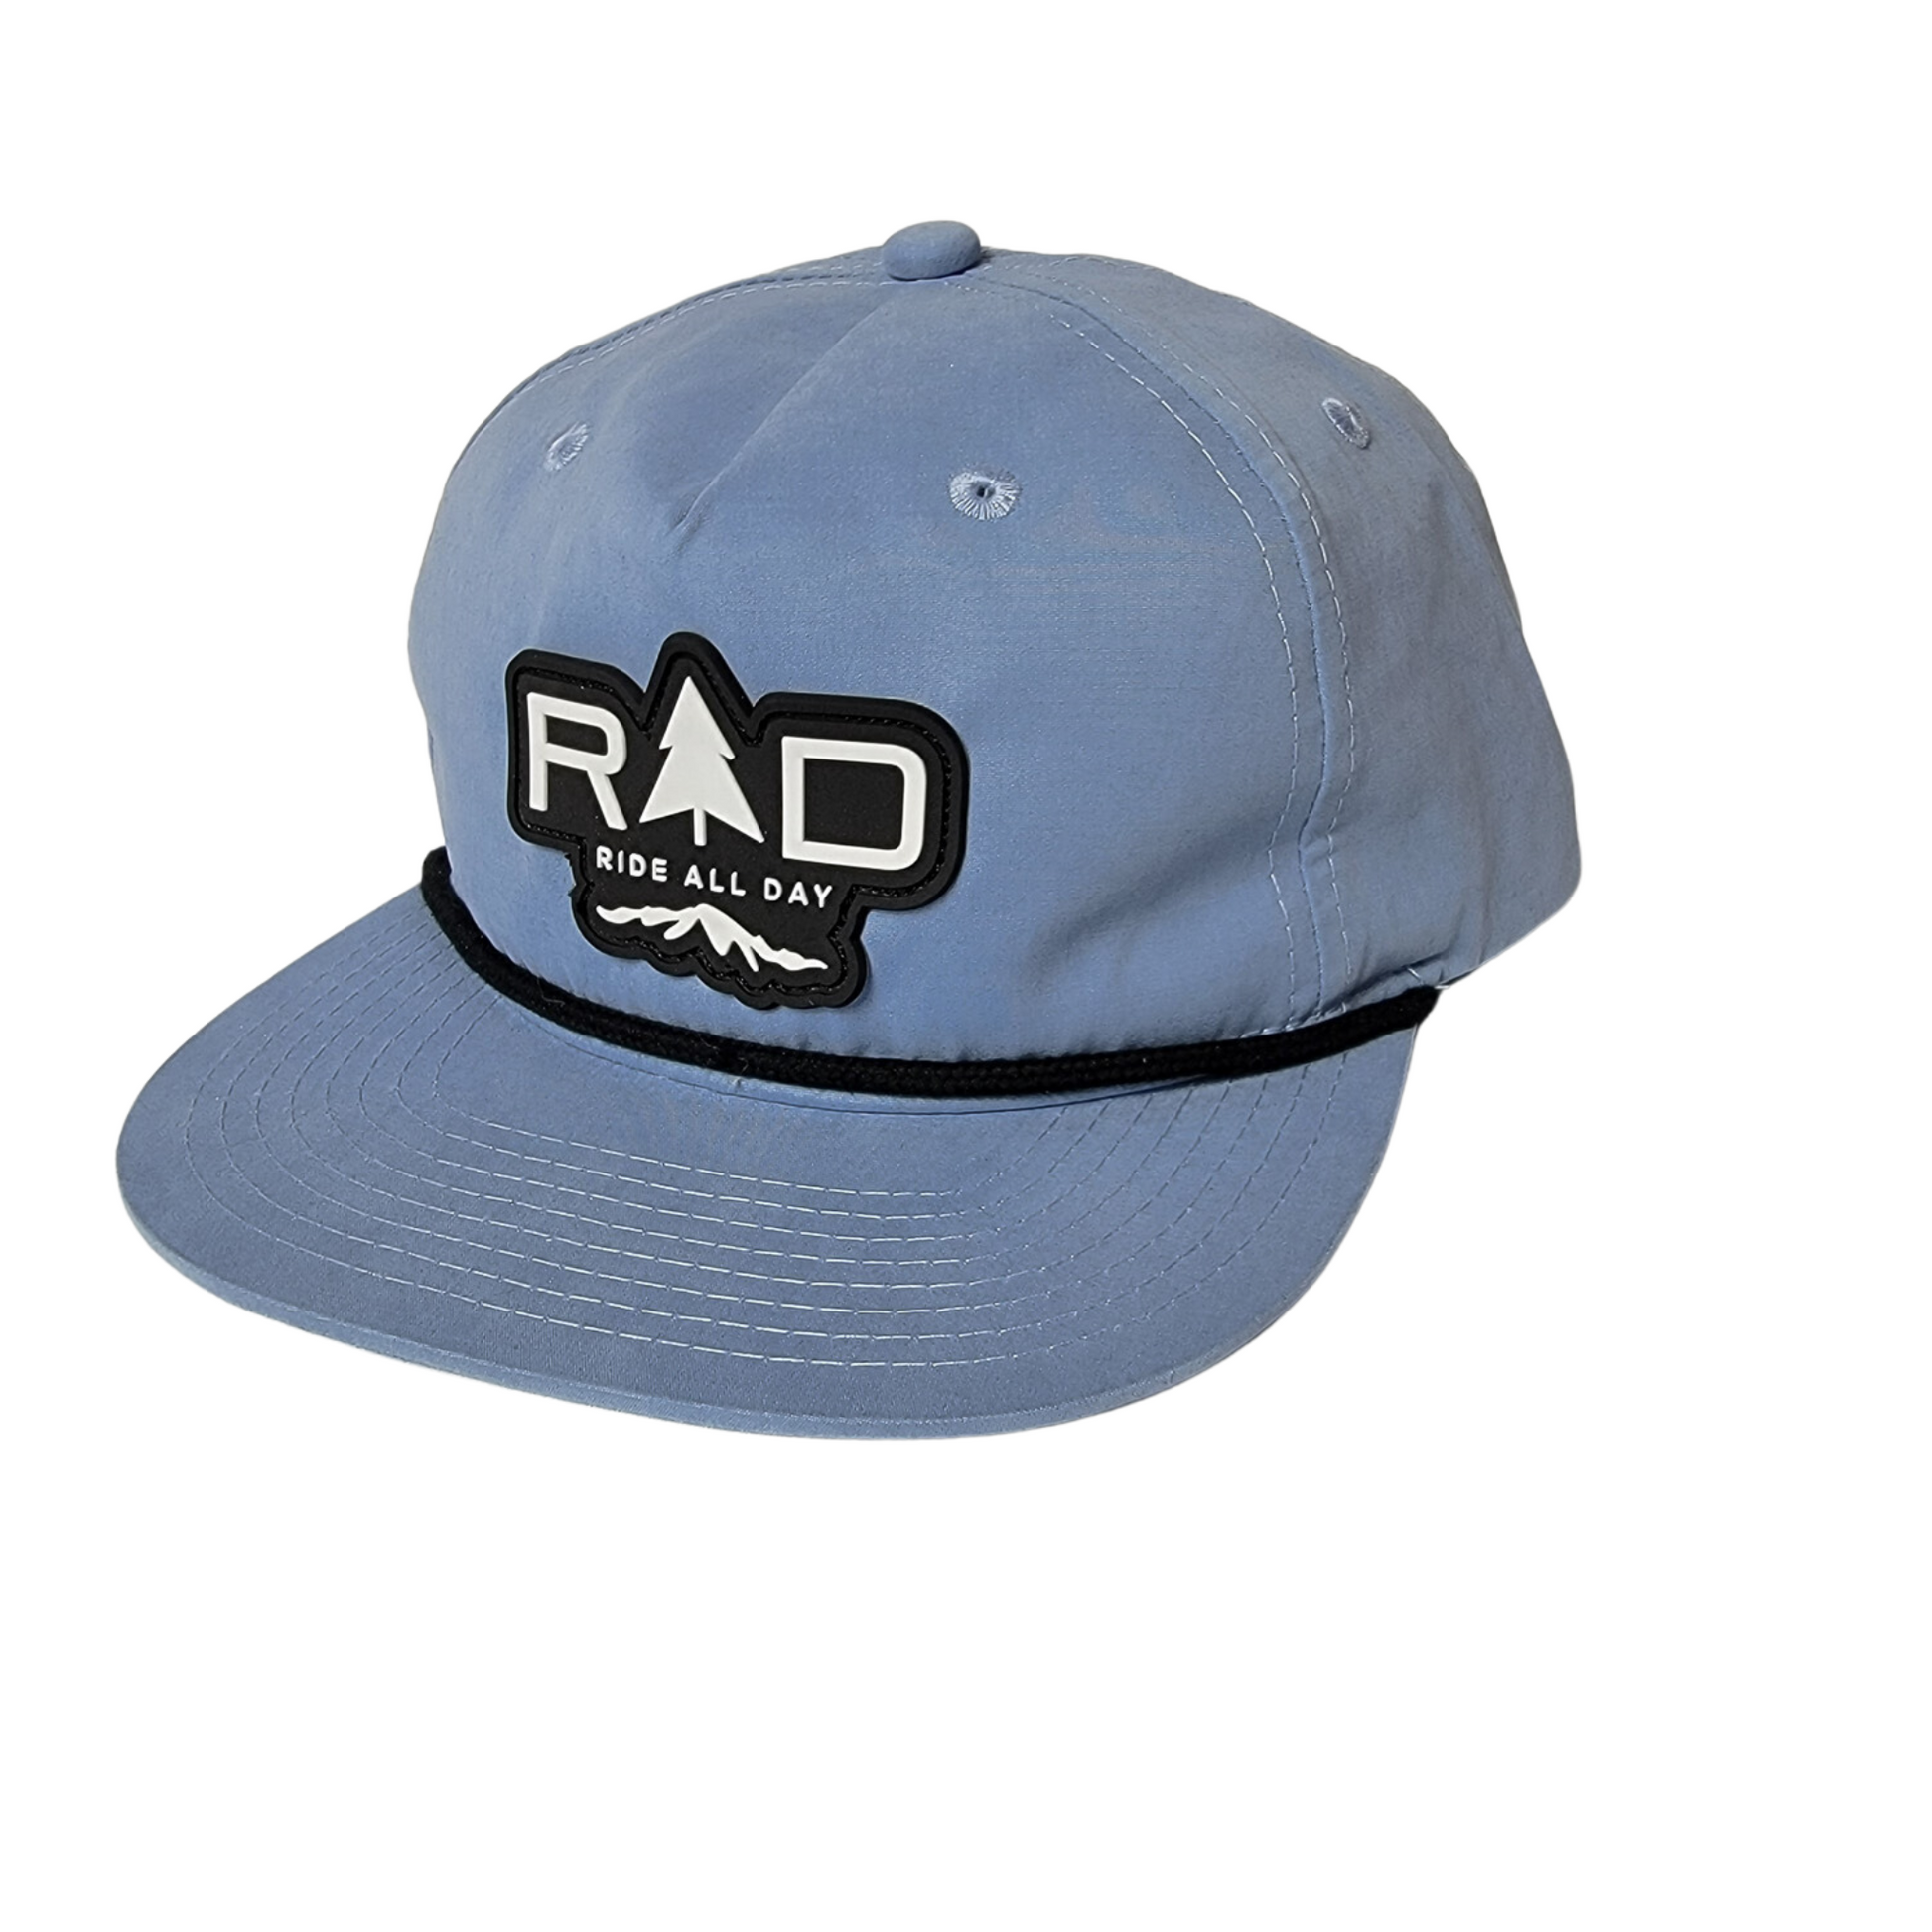 Ride All Day Apparel 5-panel trucker hat in sky blue color